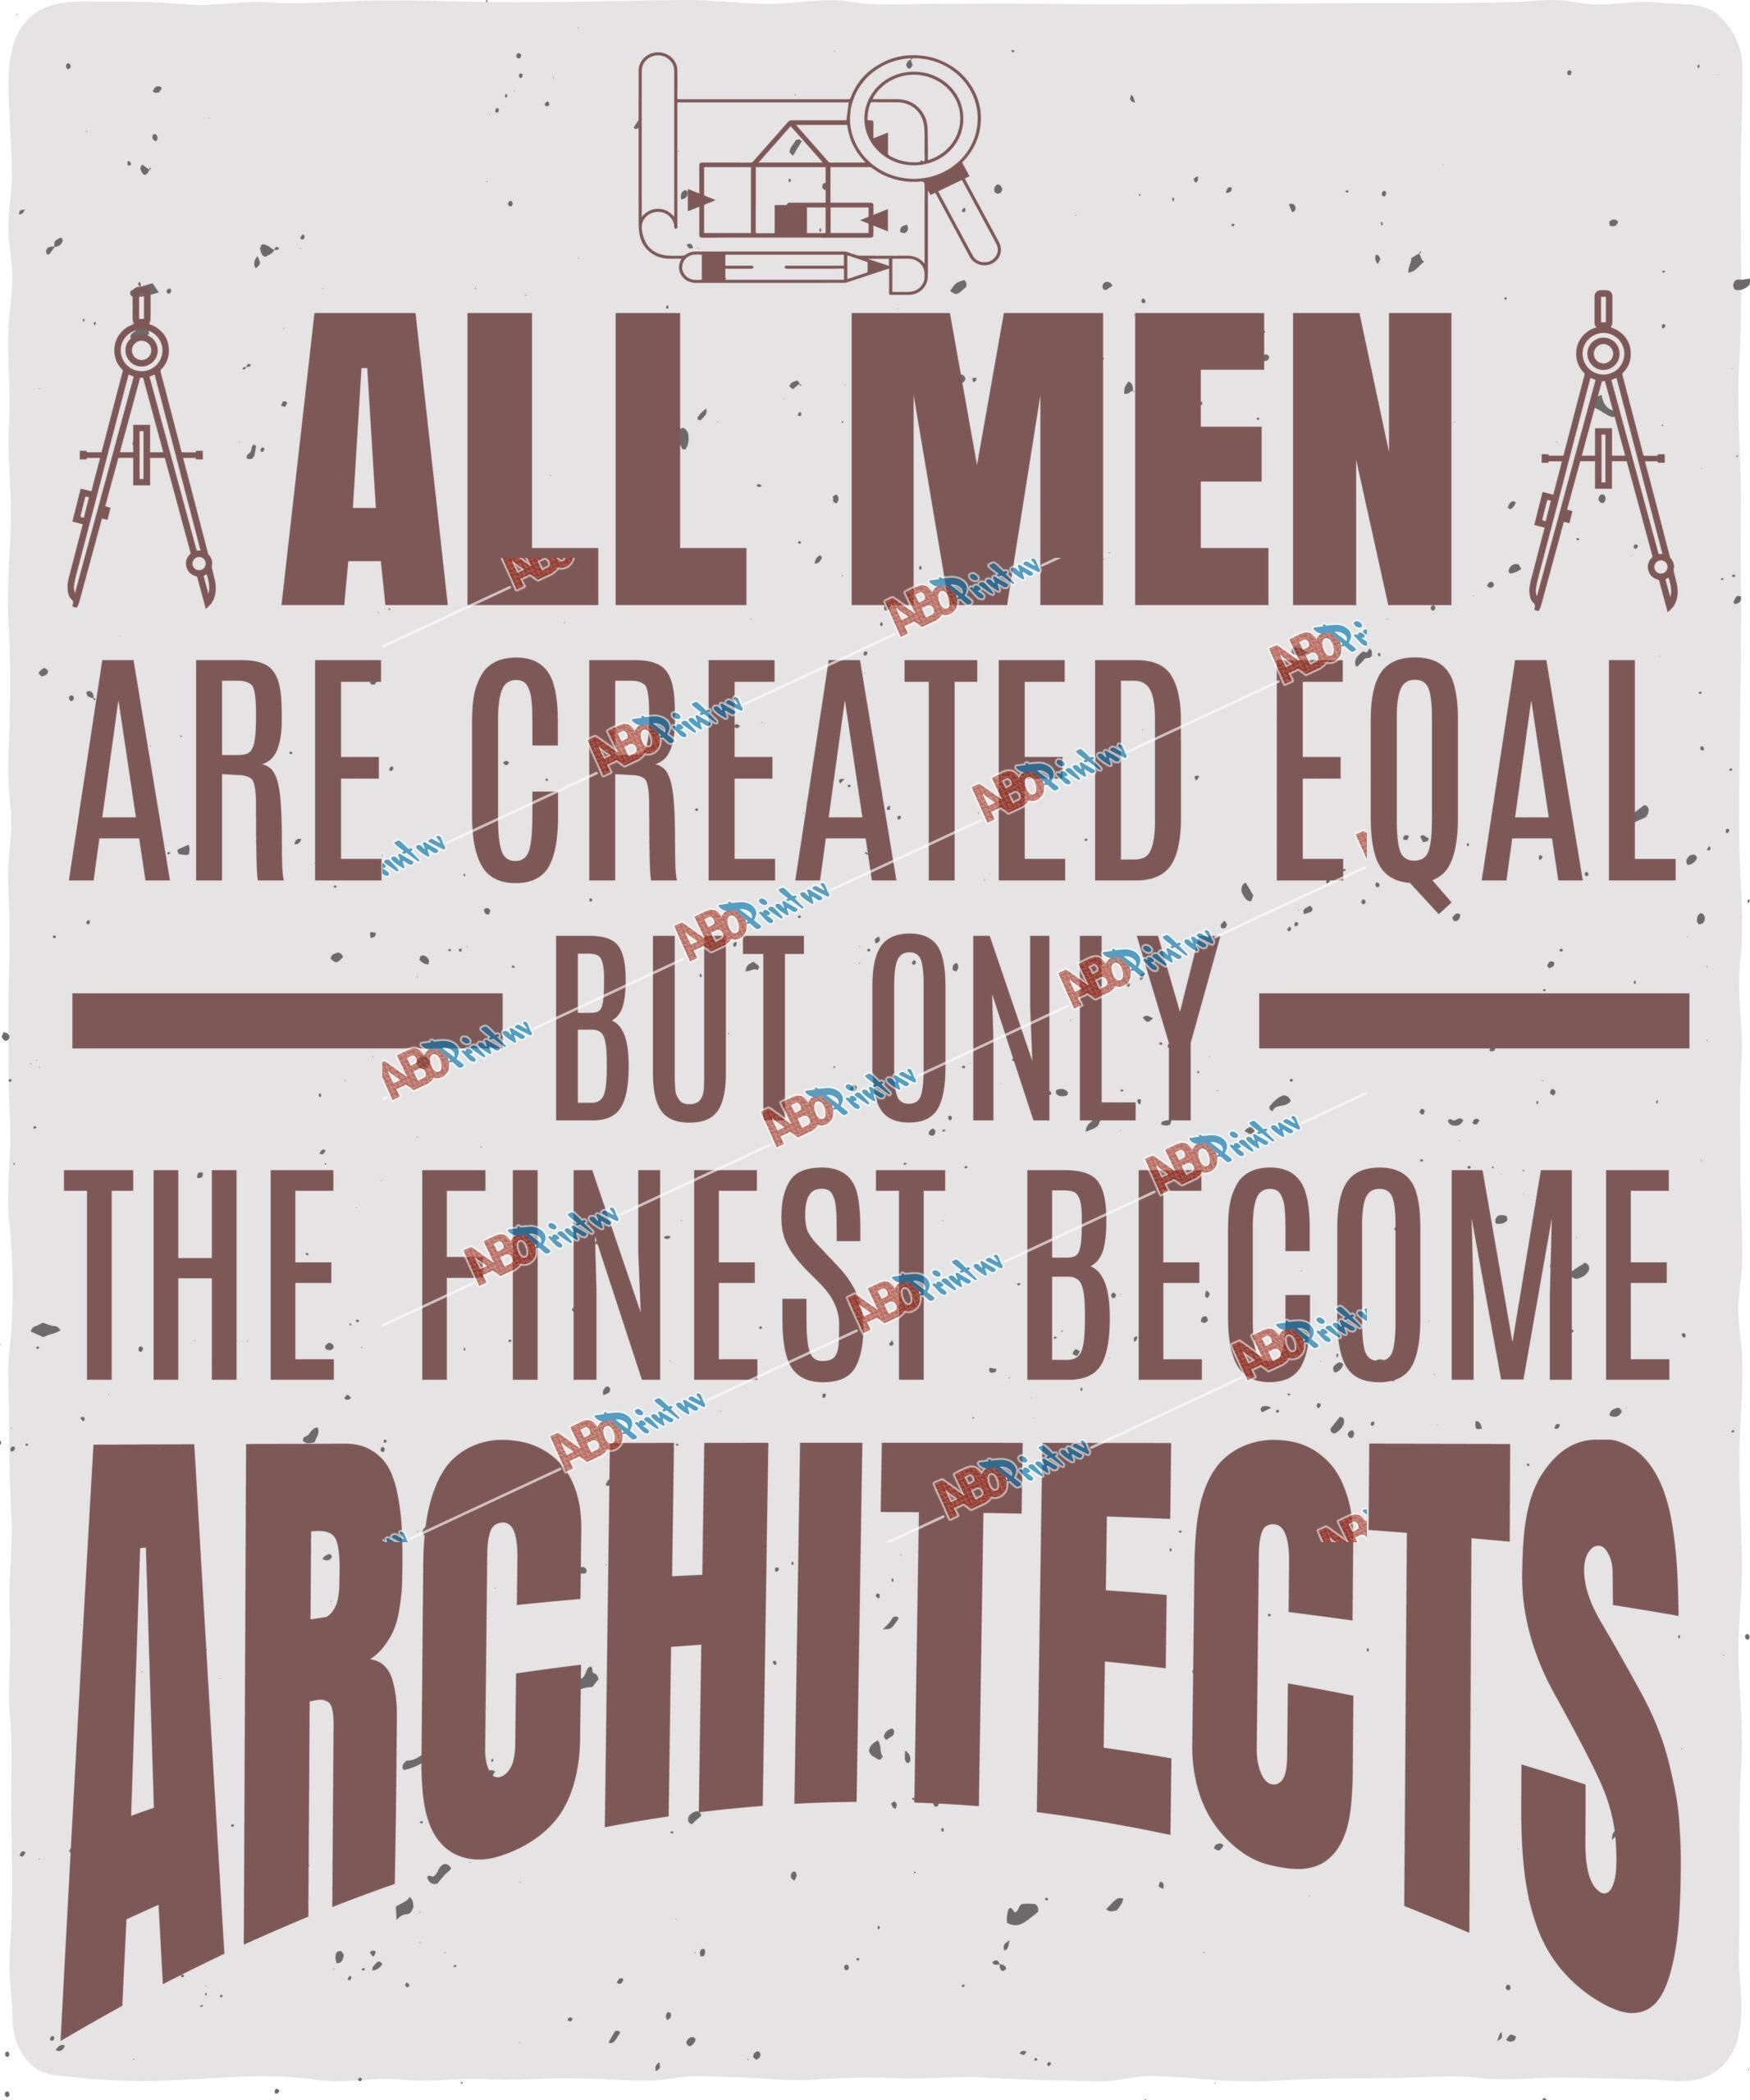 All men are created eqal but only